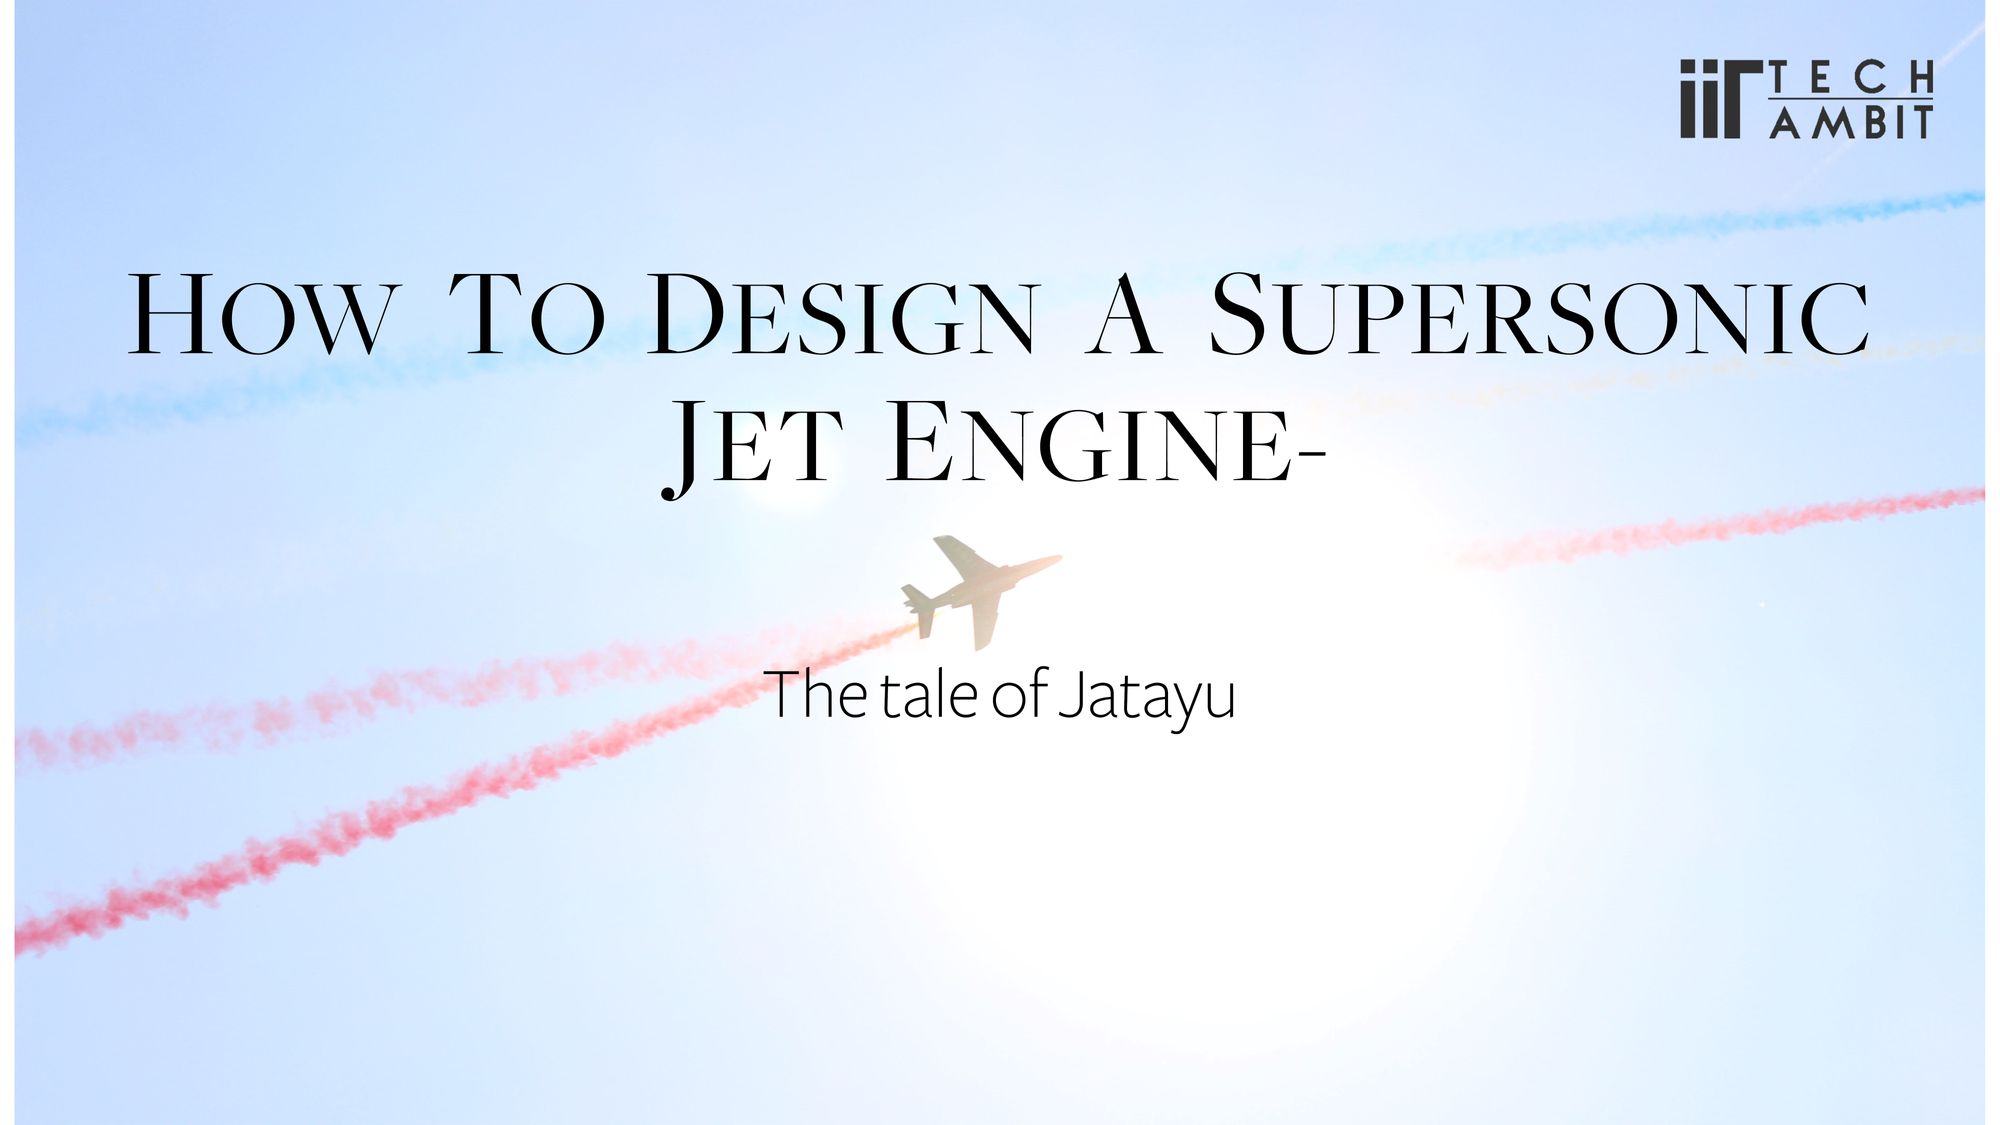 How to design a Supersonic Jet Engine- the tale of Jatayu